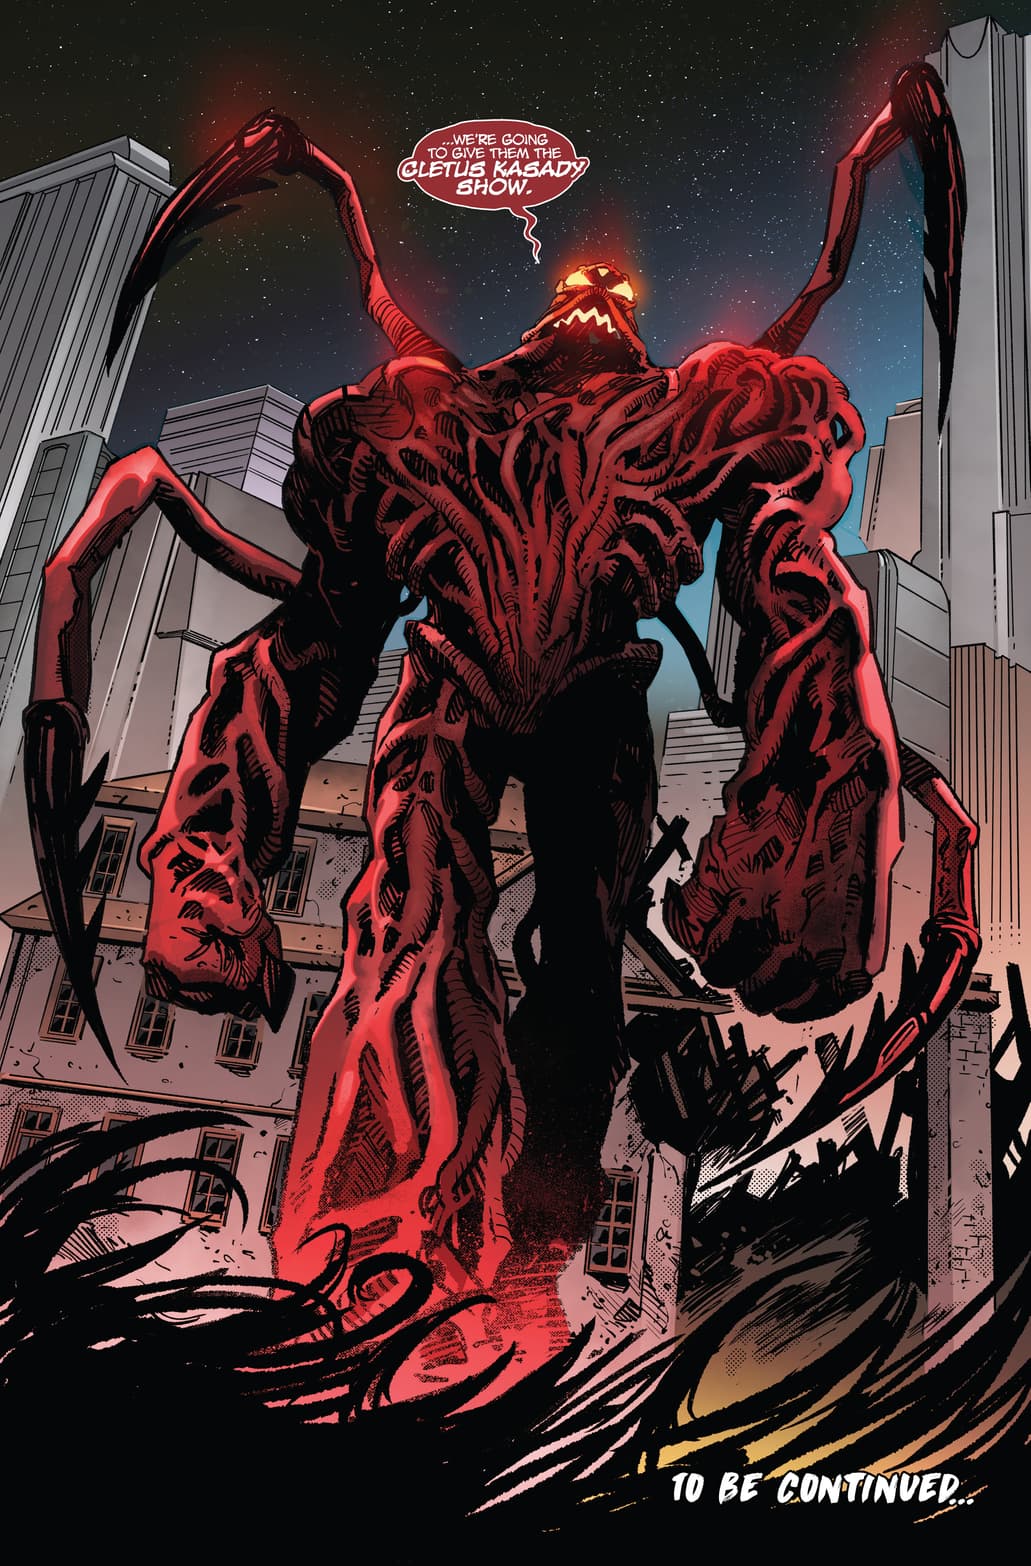 CARNAGE (2022) #11 page by Alex Paknadel and Francesco Manna